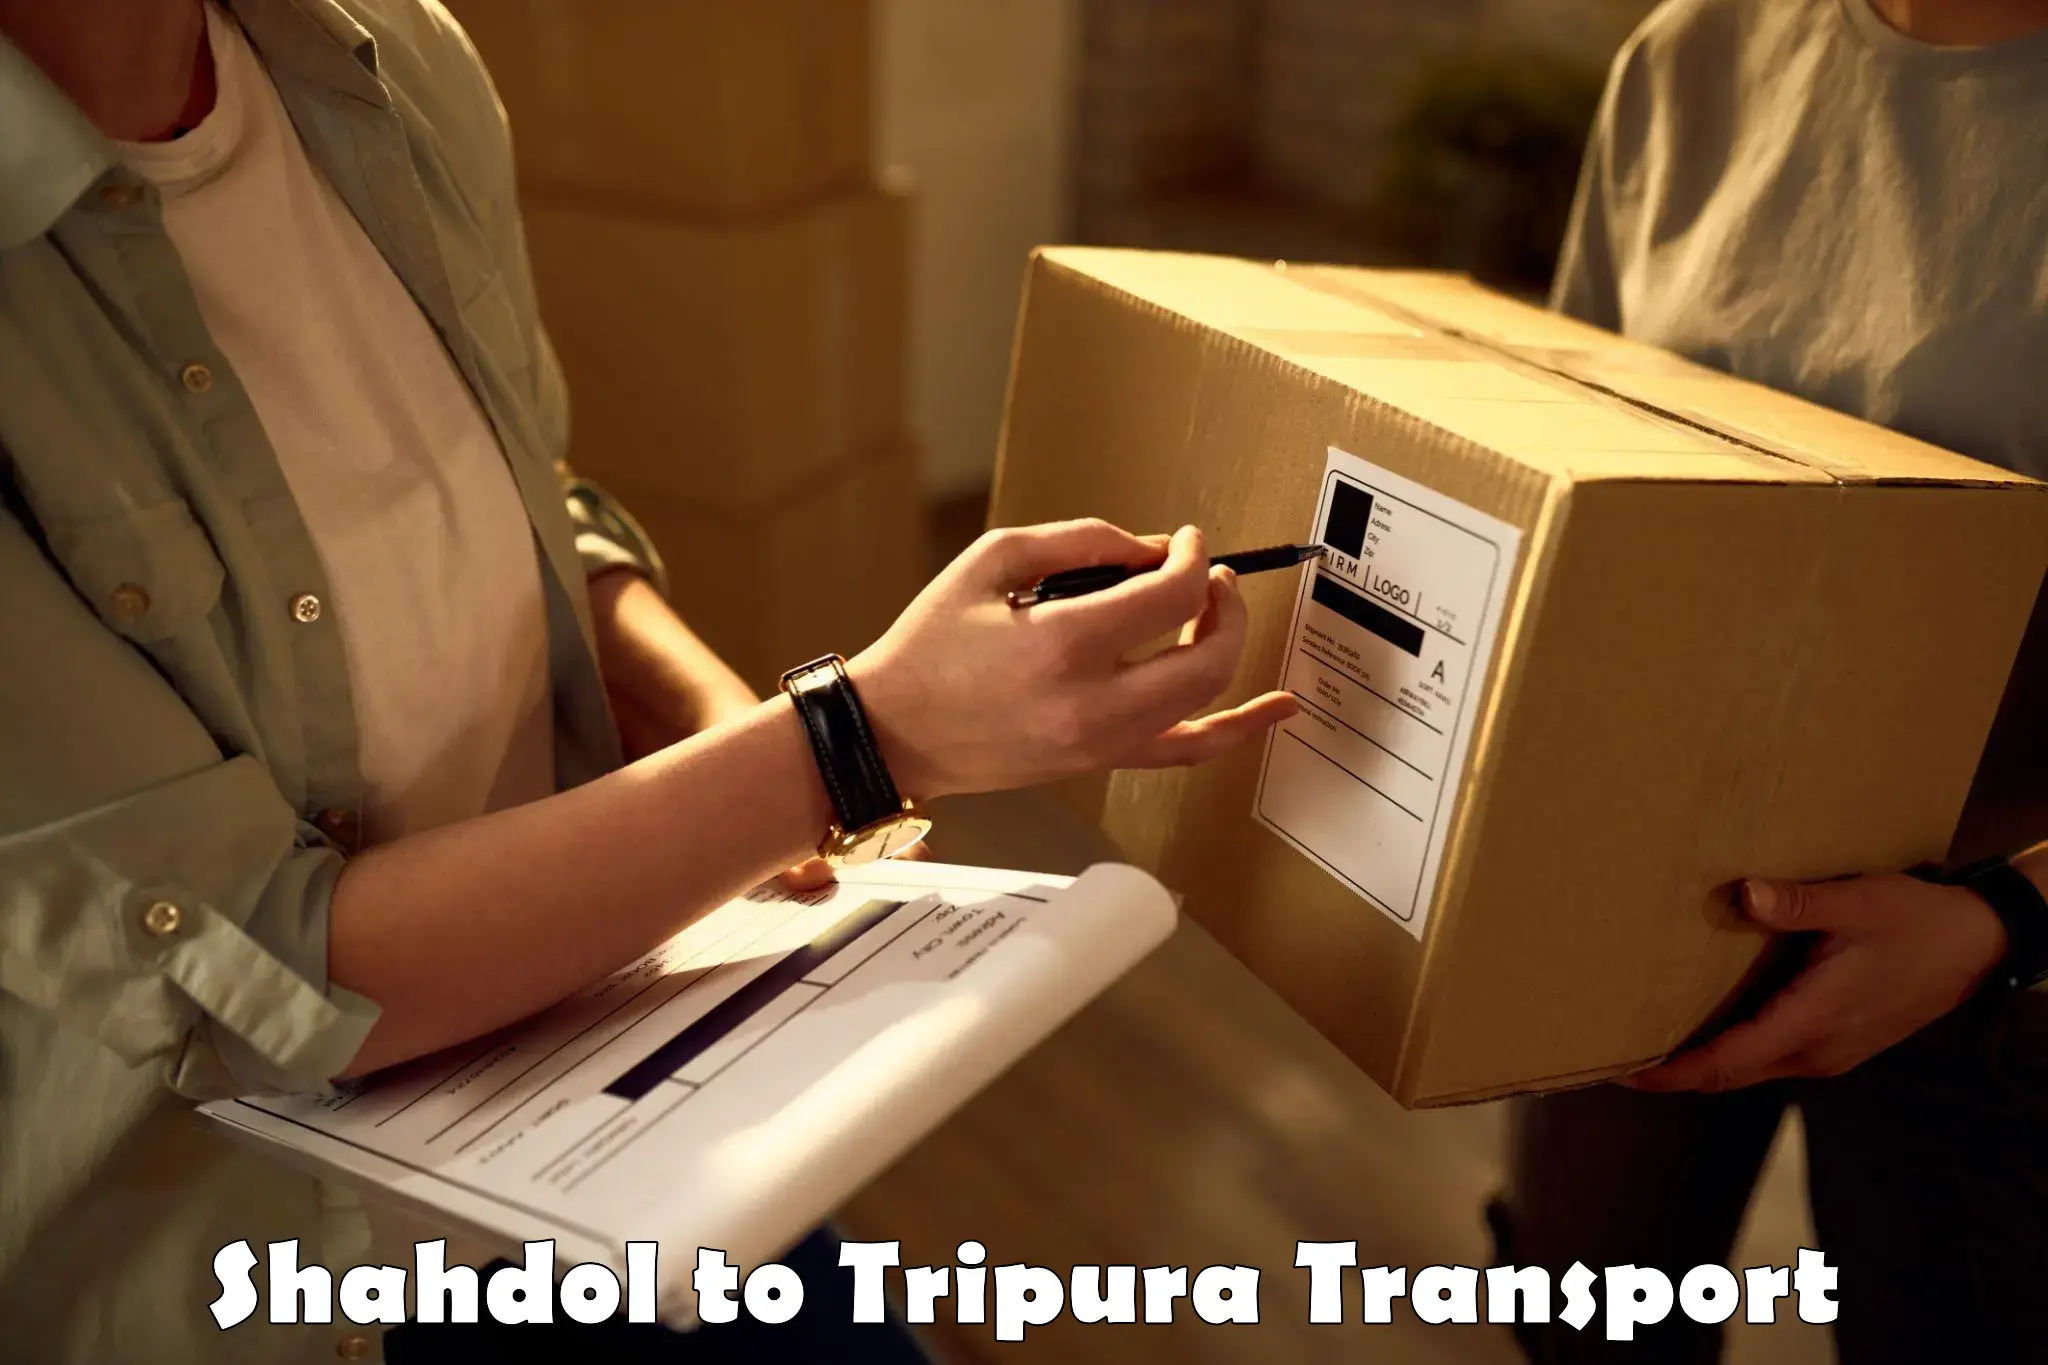 Road transport services Shahdol to Udaipur Tripura